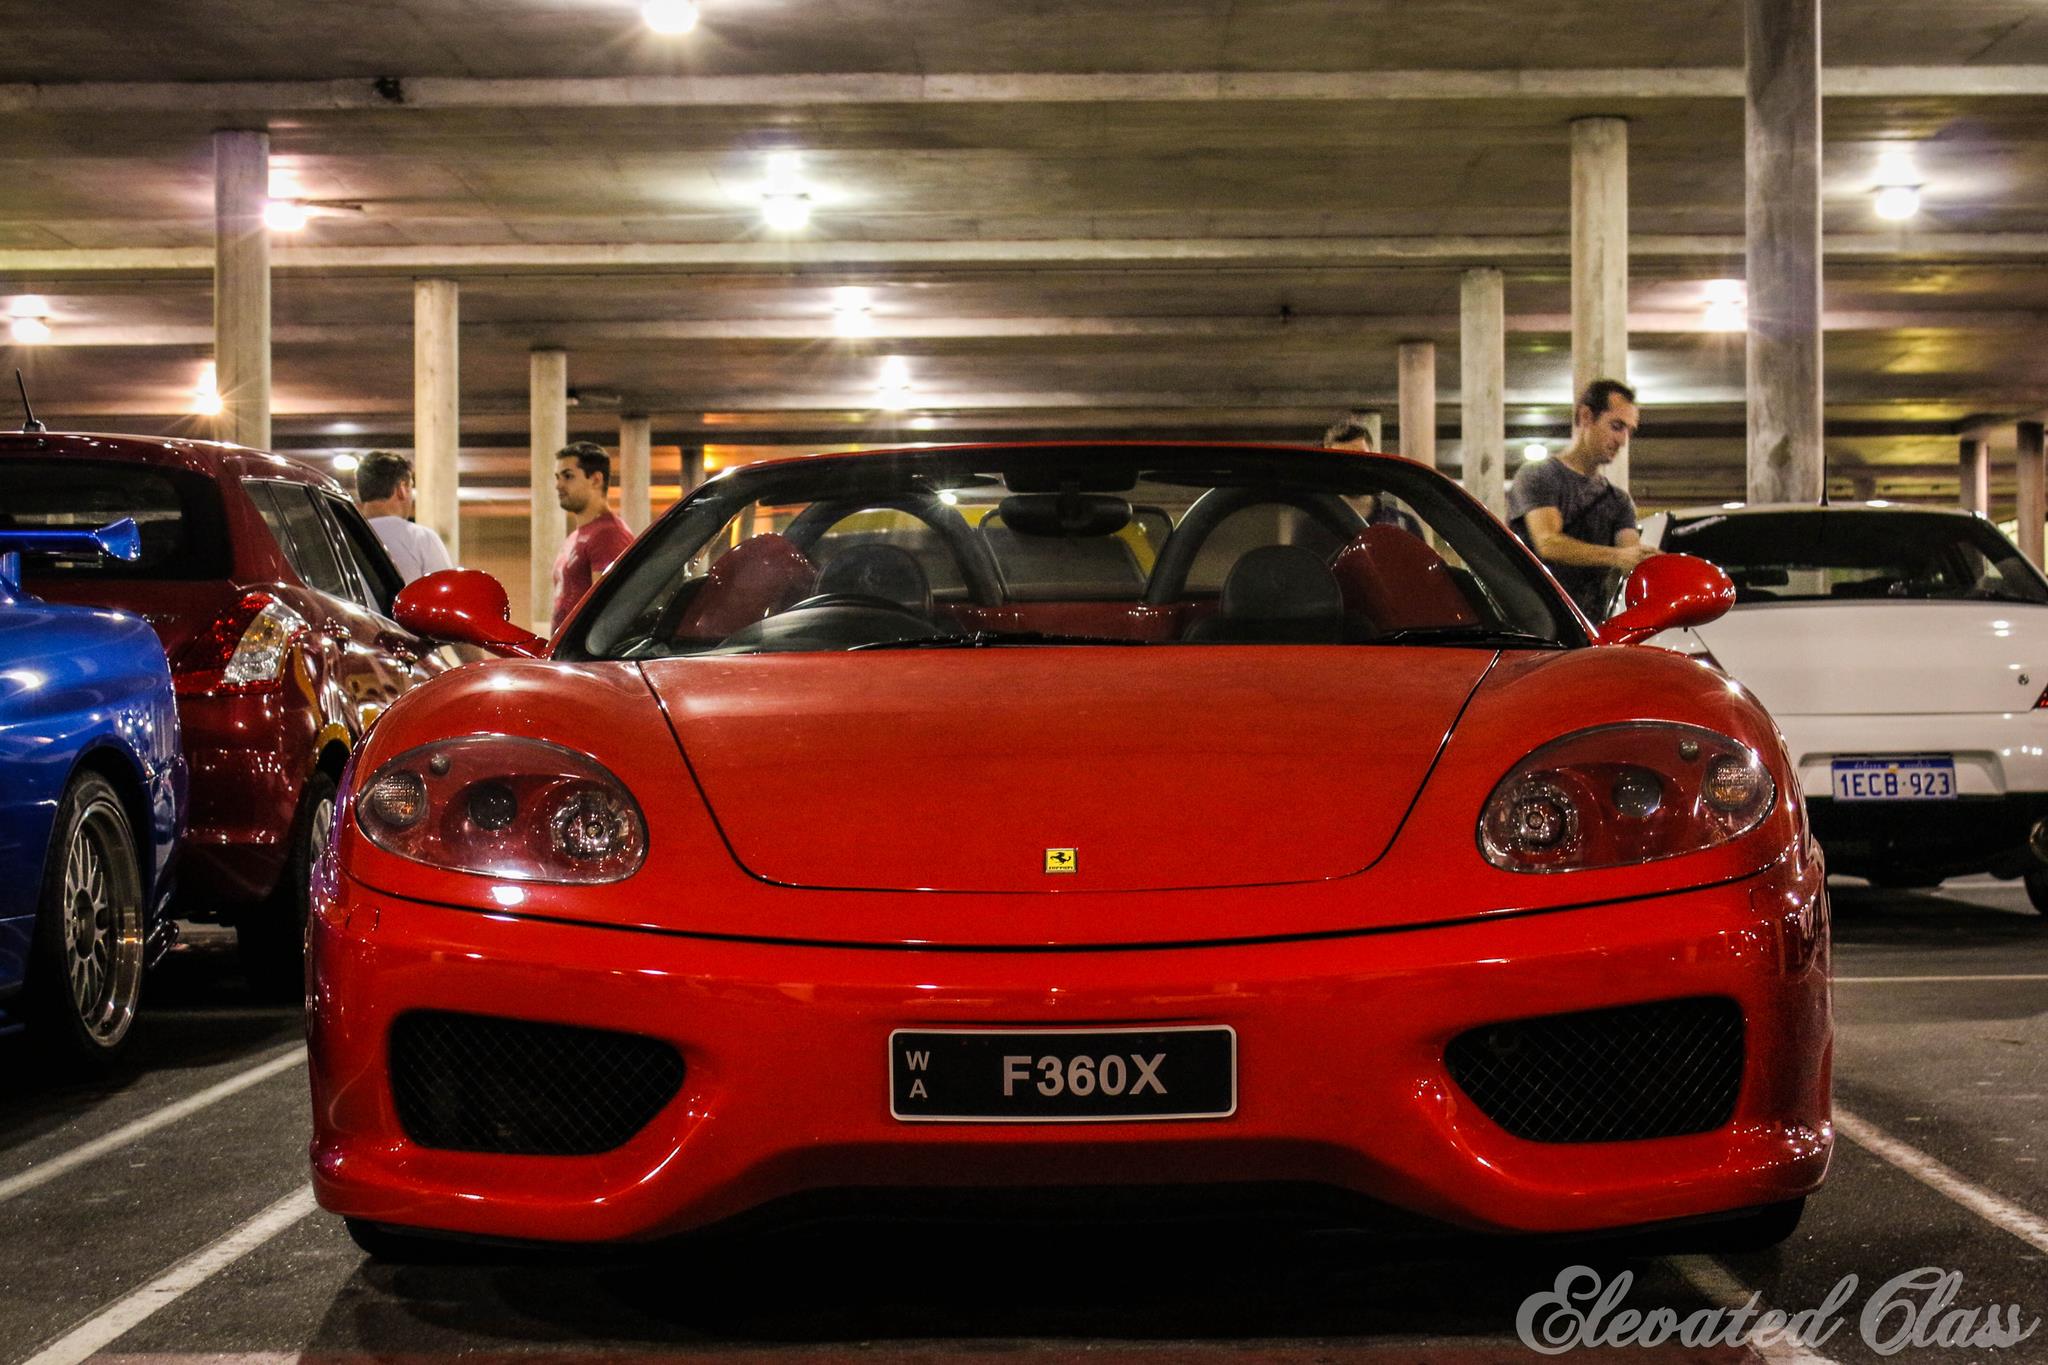 F360X number plate